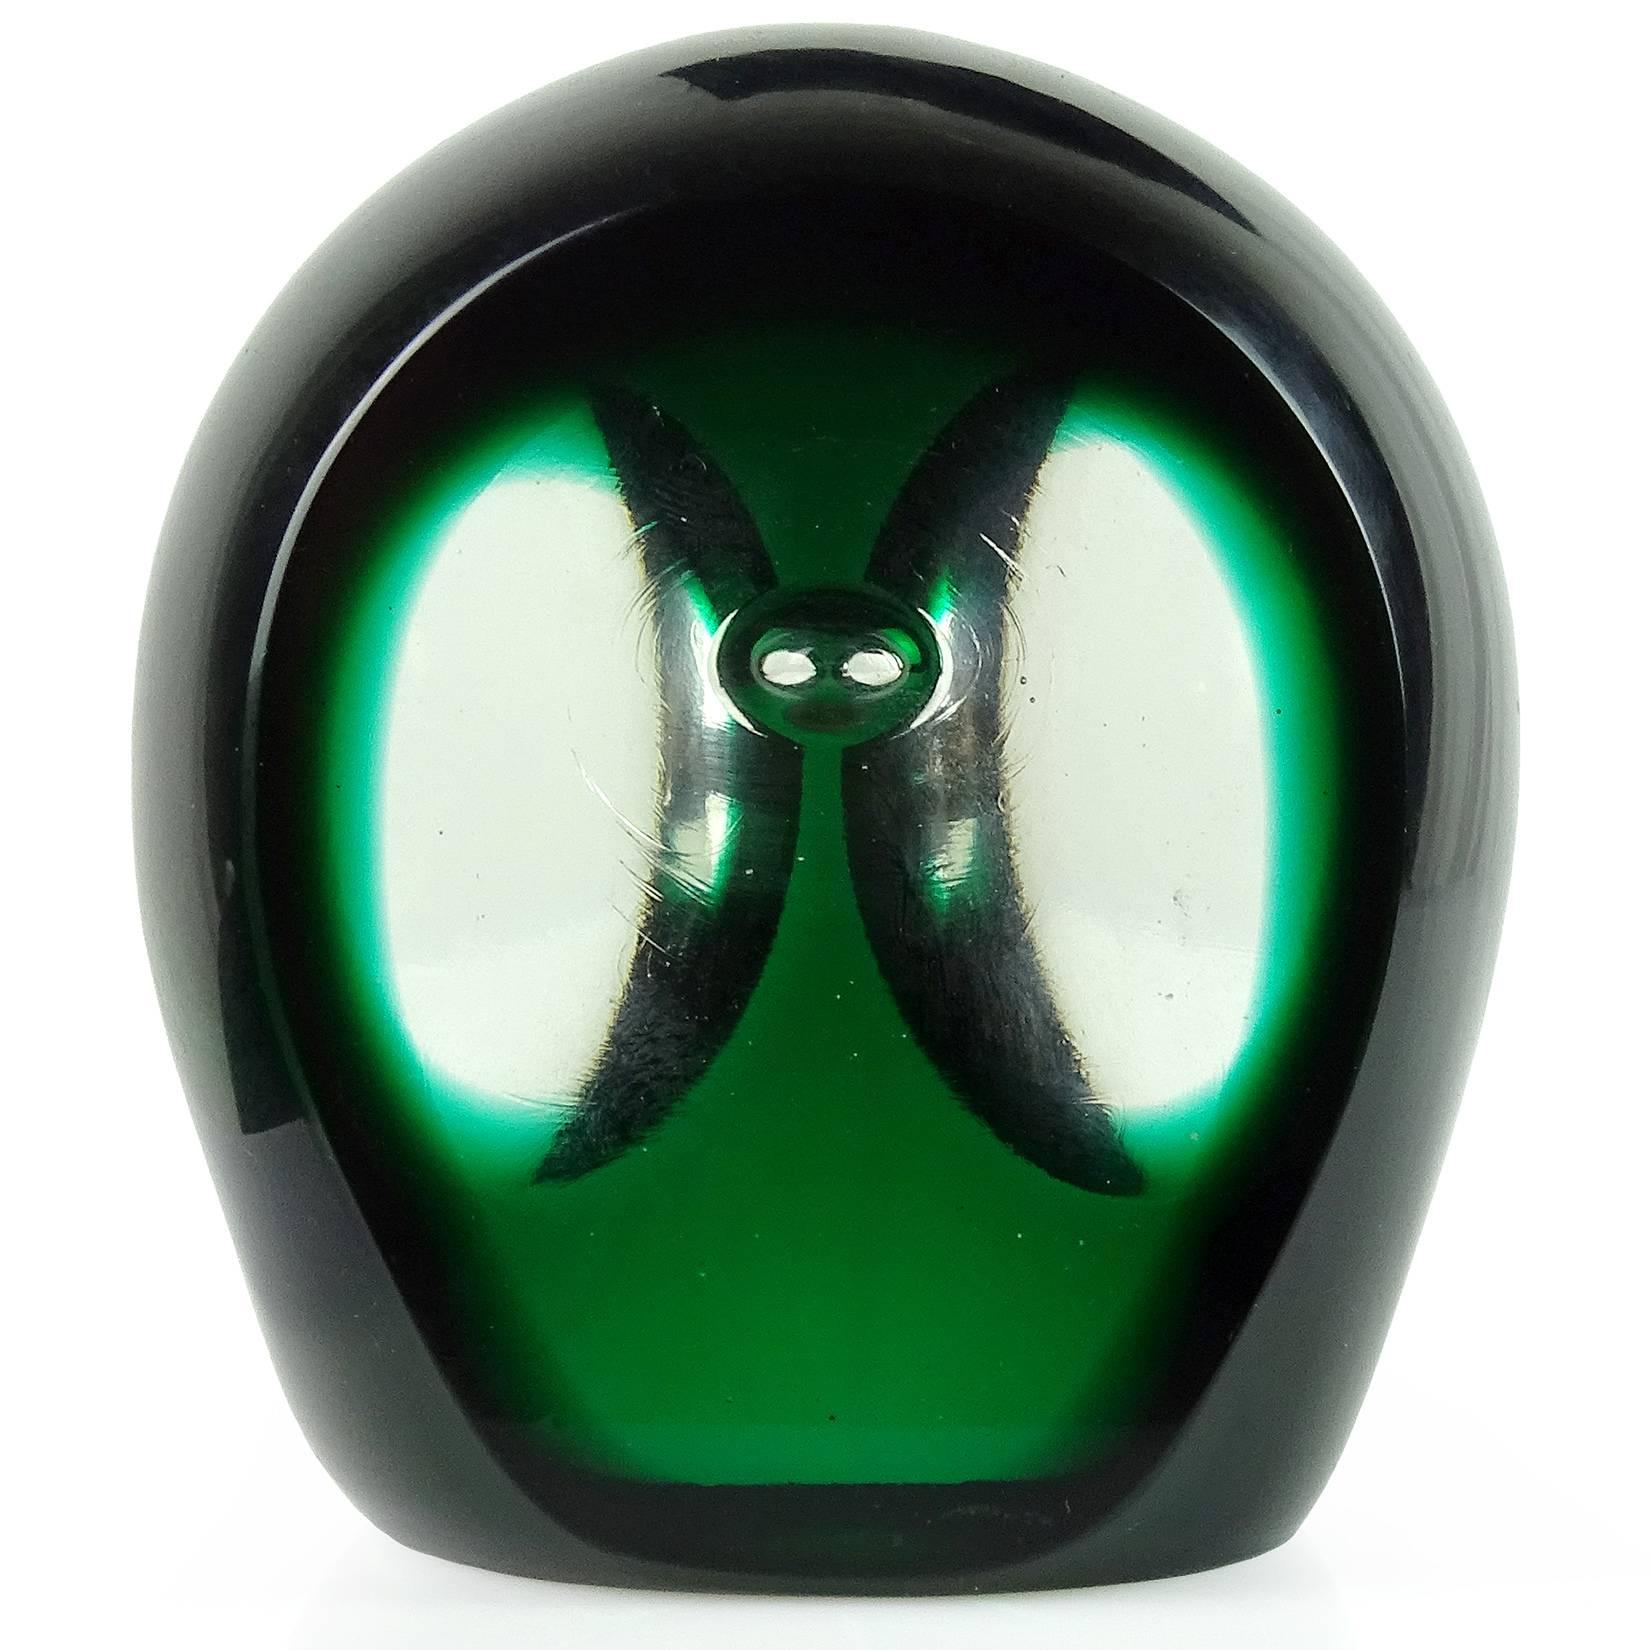 Murano handblown Sommerso dark green Italian art glass owl figurine or paperweight. Documented to the Salviati & Co., with original label underneath. There is one little bubble inside, which acts as the two eyes of the bird. Very cute piece!